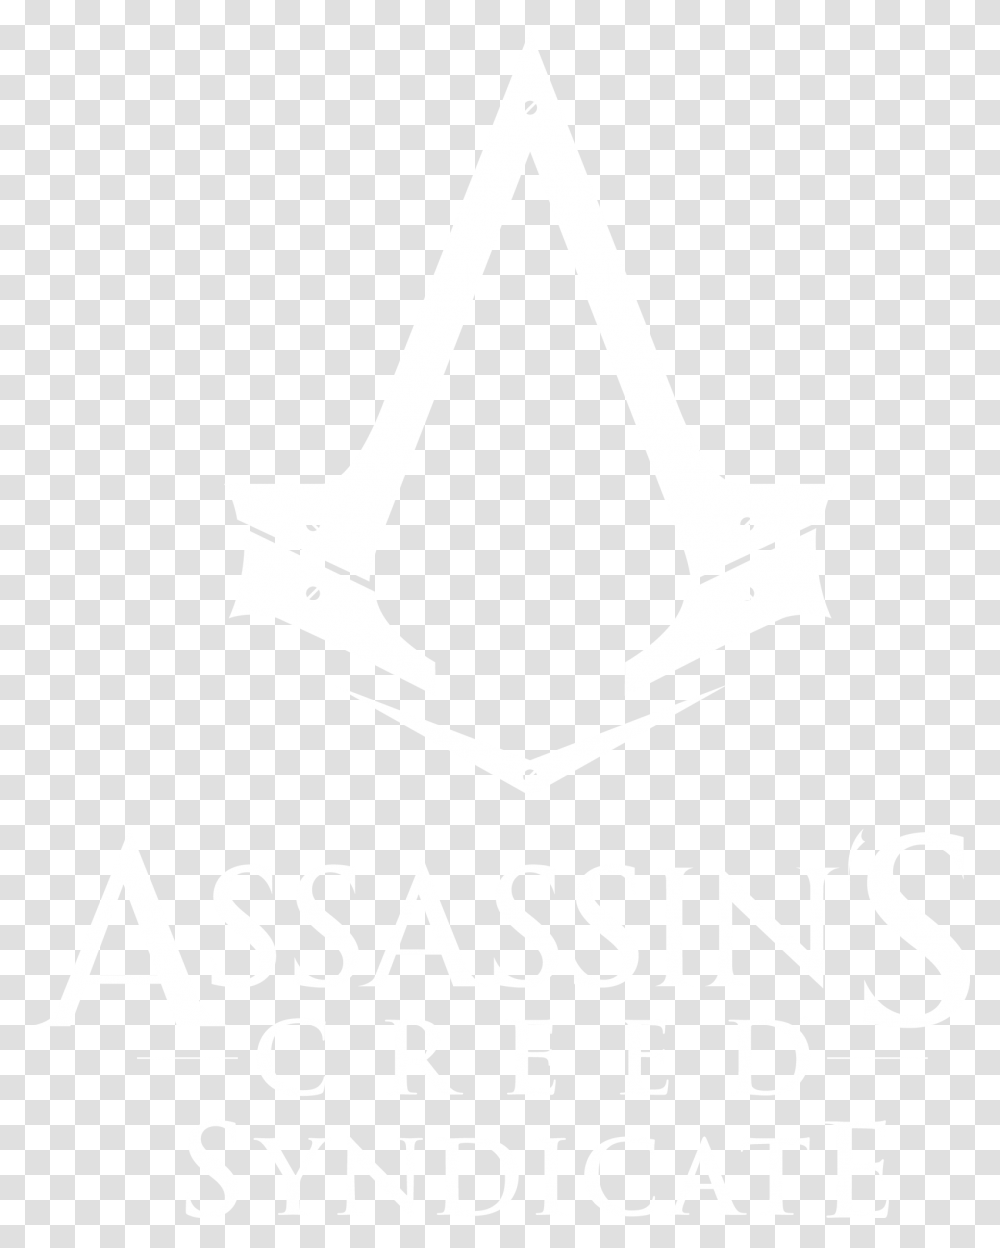 Assassin's Creed Syndicate Logo Assassins Creed Syndicate Icon, White, Texture, White Board Transparent Png